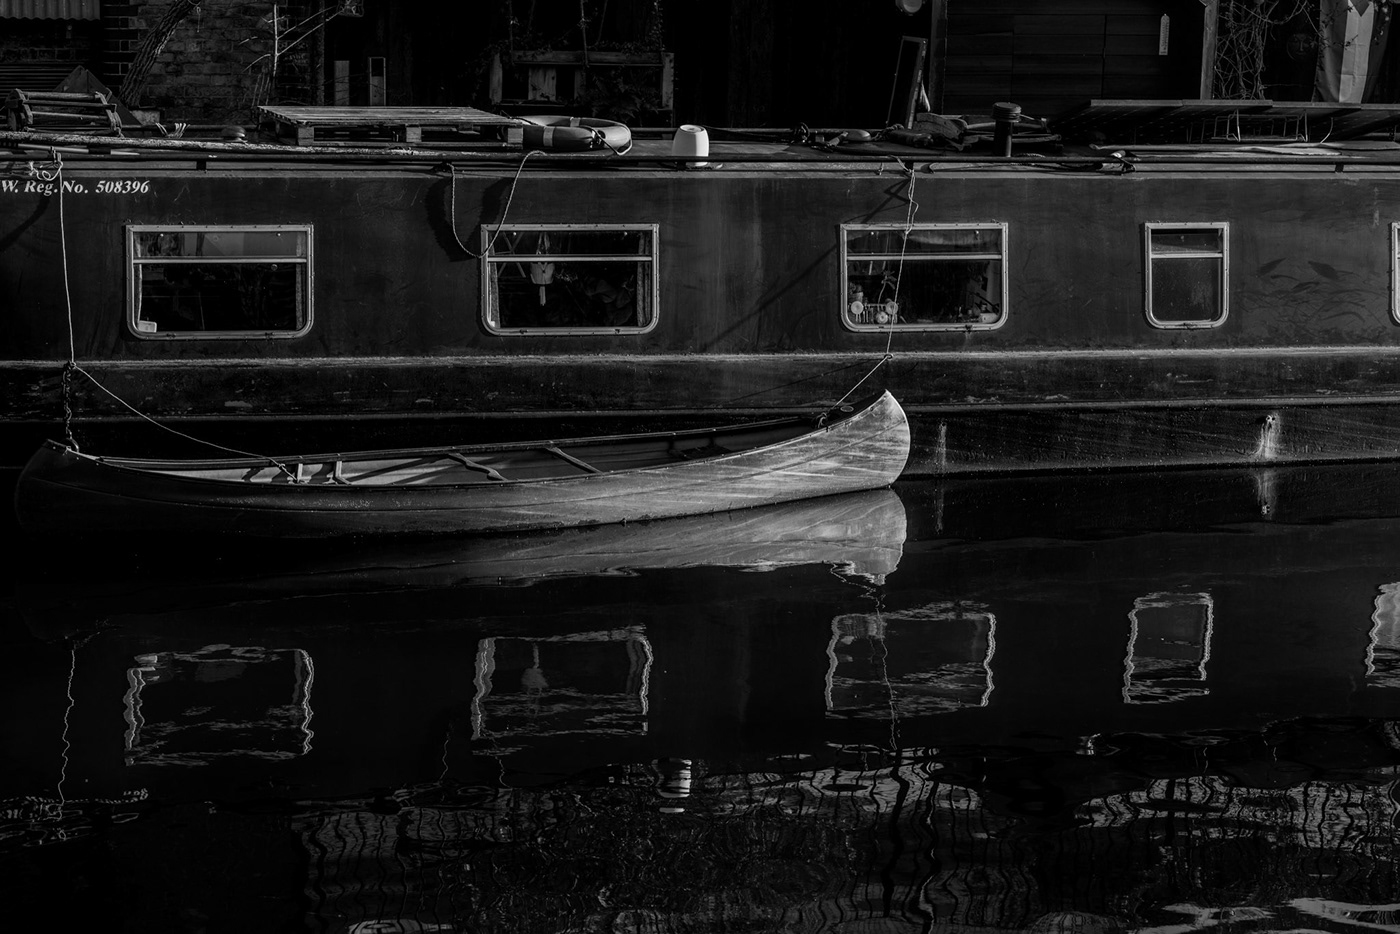 London regent's canal Photography  photographer Shane Aurousseau Waterways & Canals travel photography narrowboat canal canoes